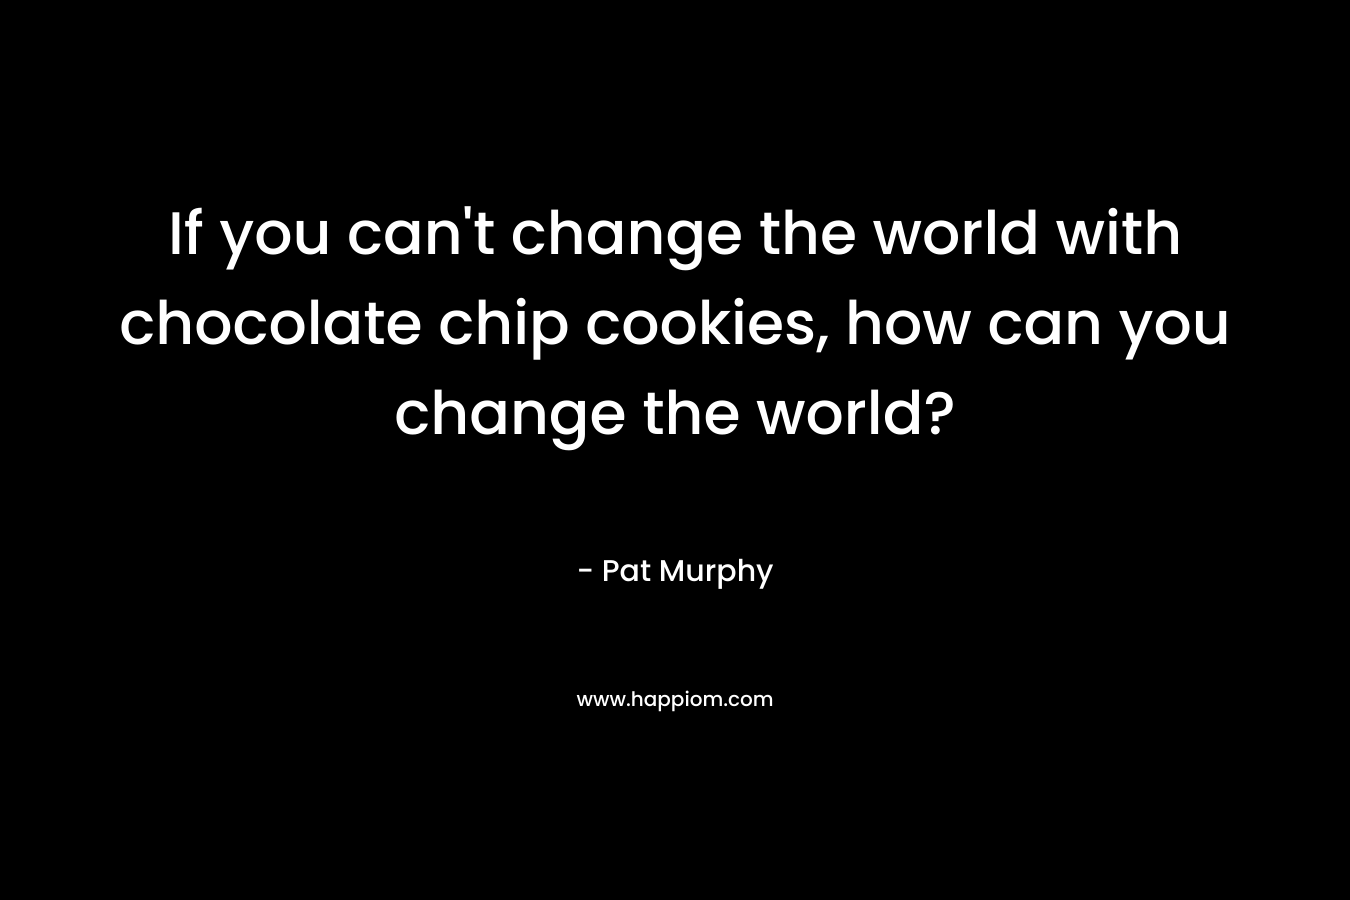 If you can’t change the world with chocolate chip cookies, how can you change the world? – Pat Murphy